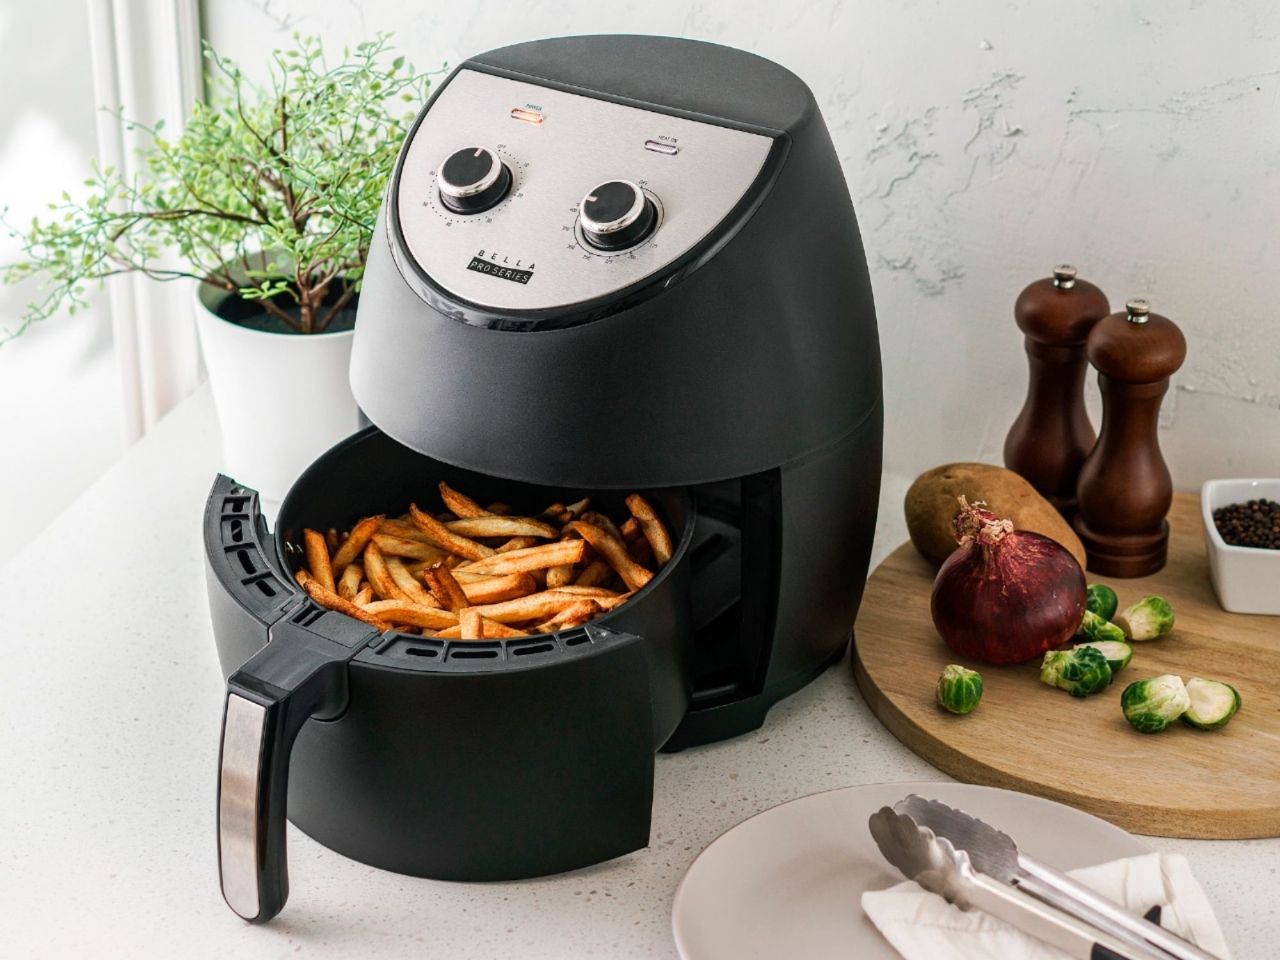 Try These 3 Easy Methods for Cleaning an Air Fryer